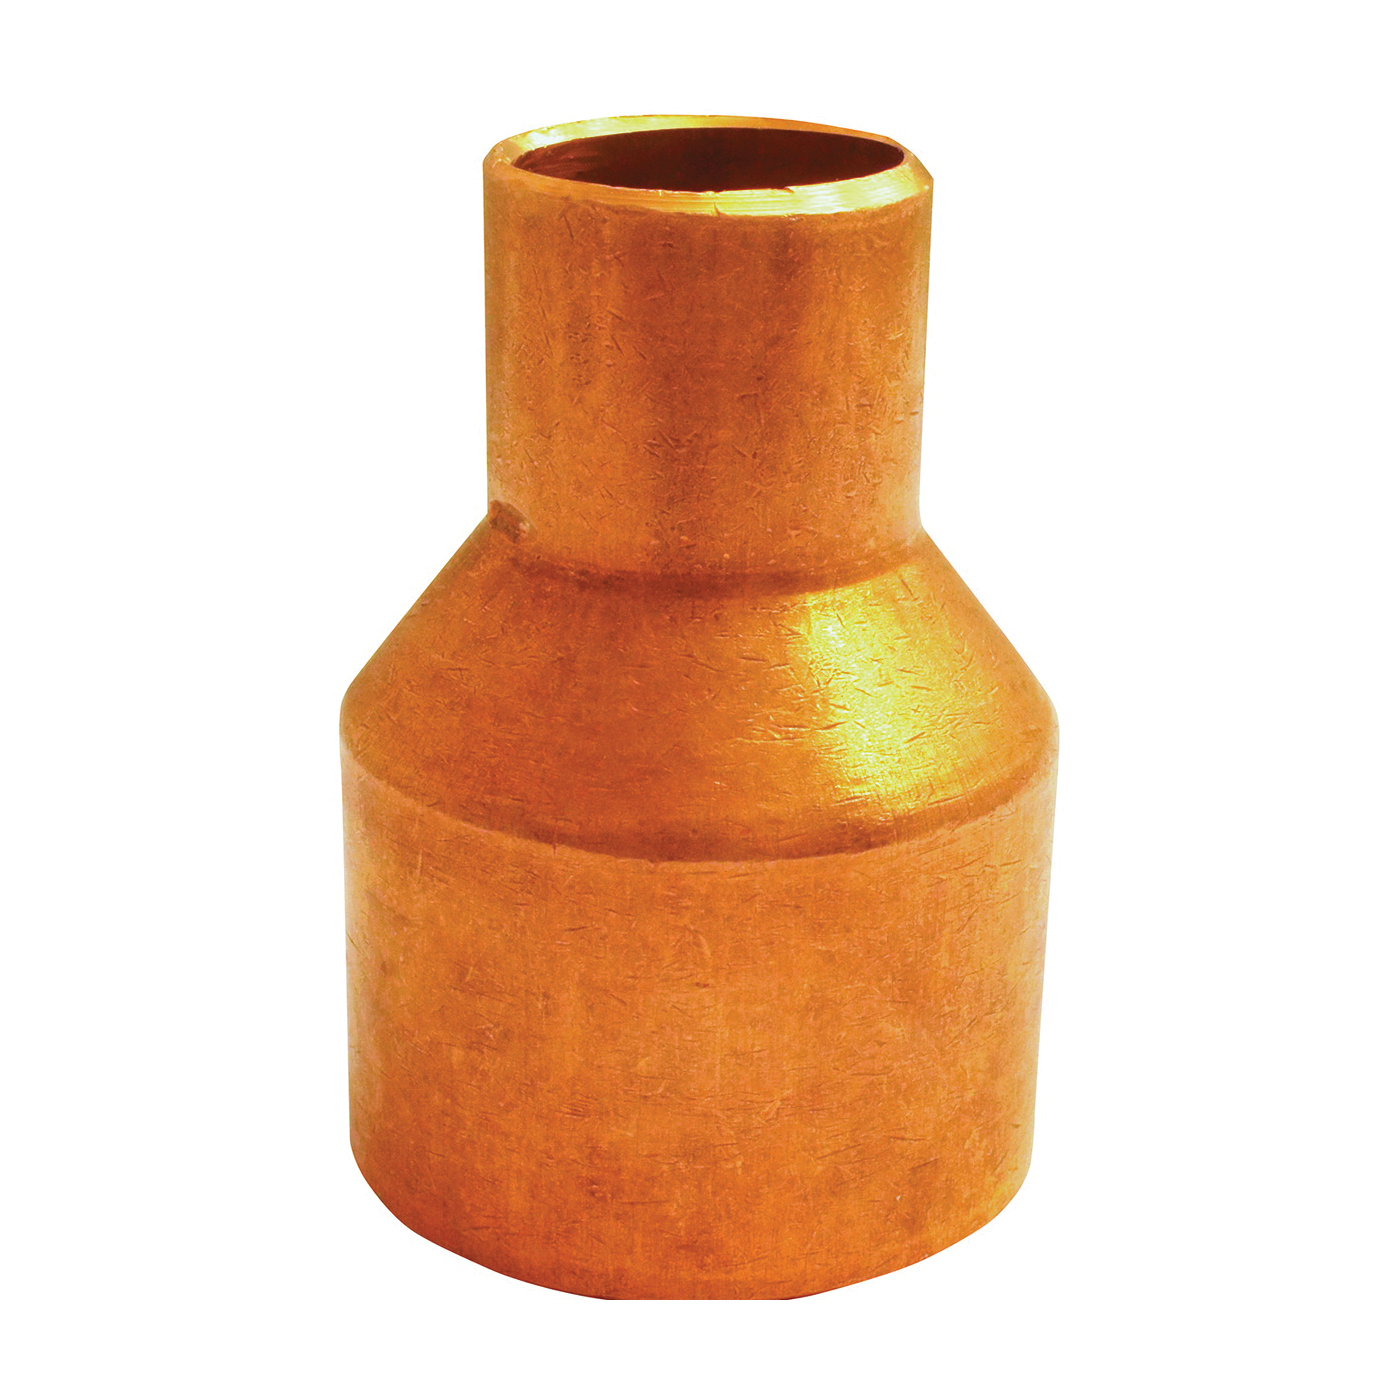 EPC 101R Series 30734 Reducing Pipe Coupling with Stop, 1 x 3/4 in, Sweat - 1